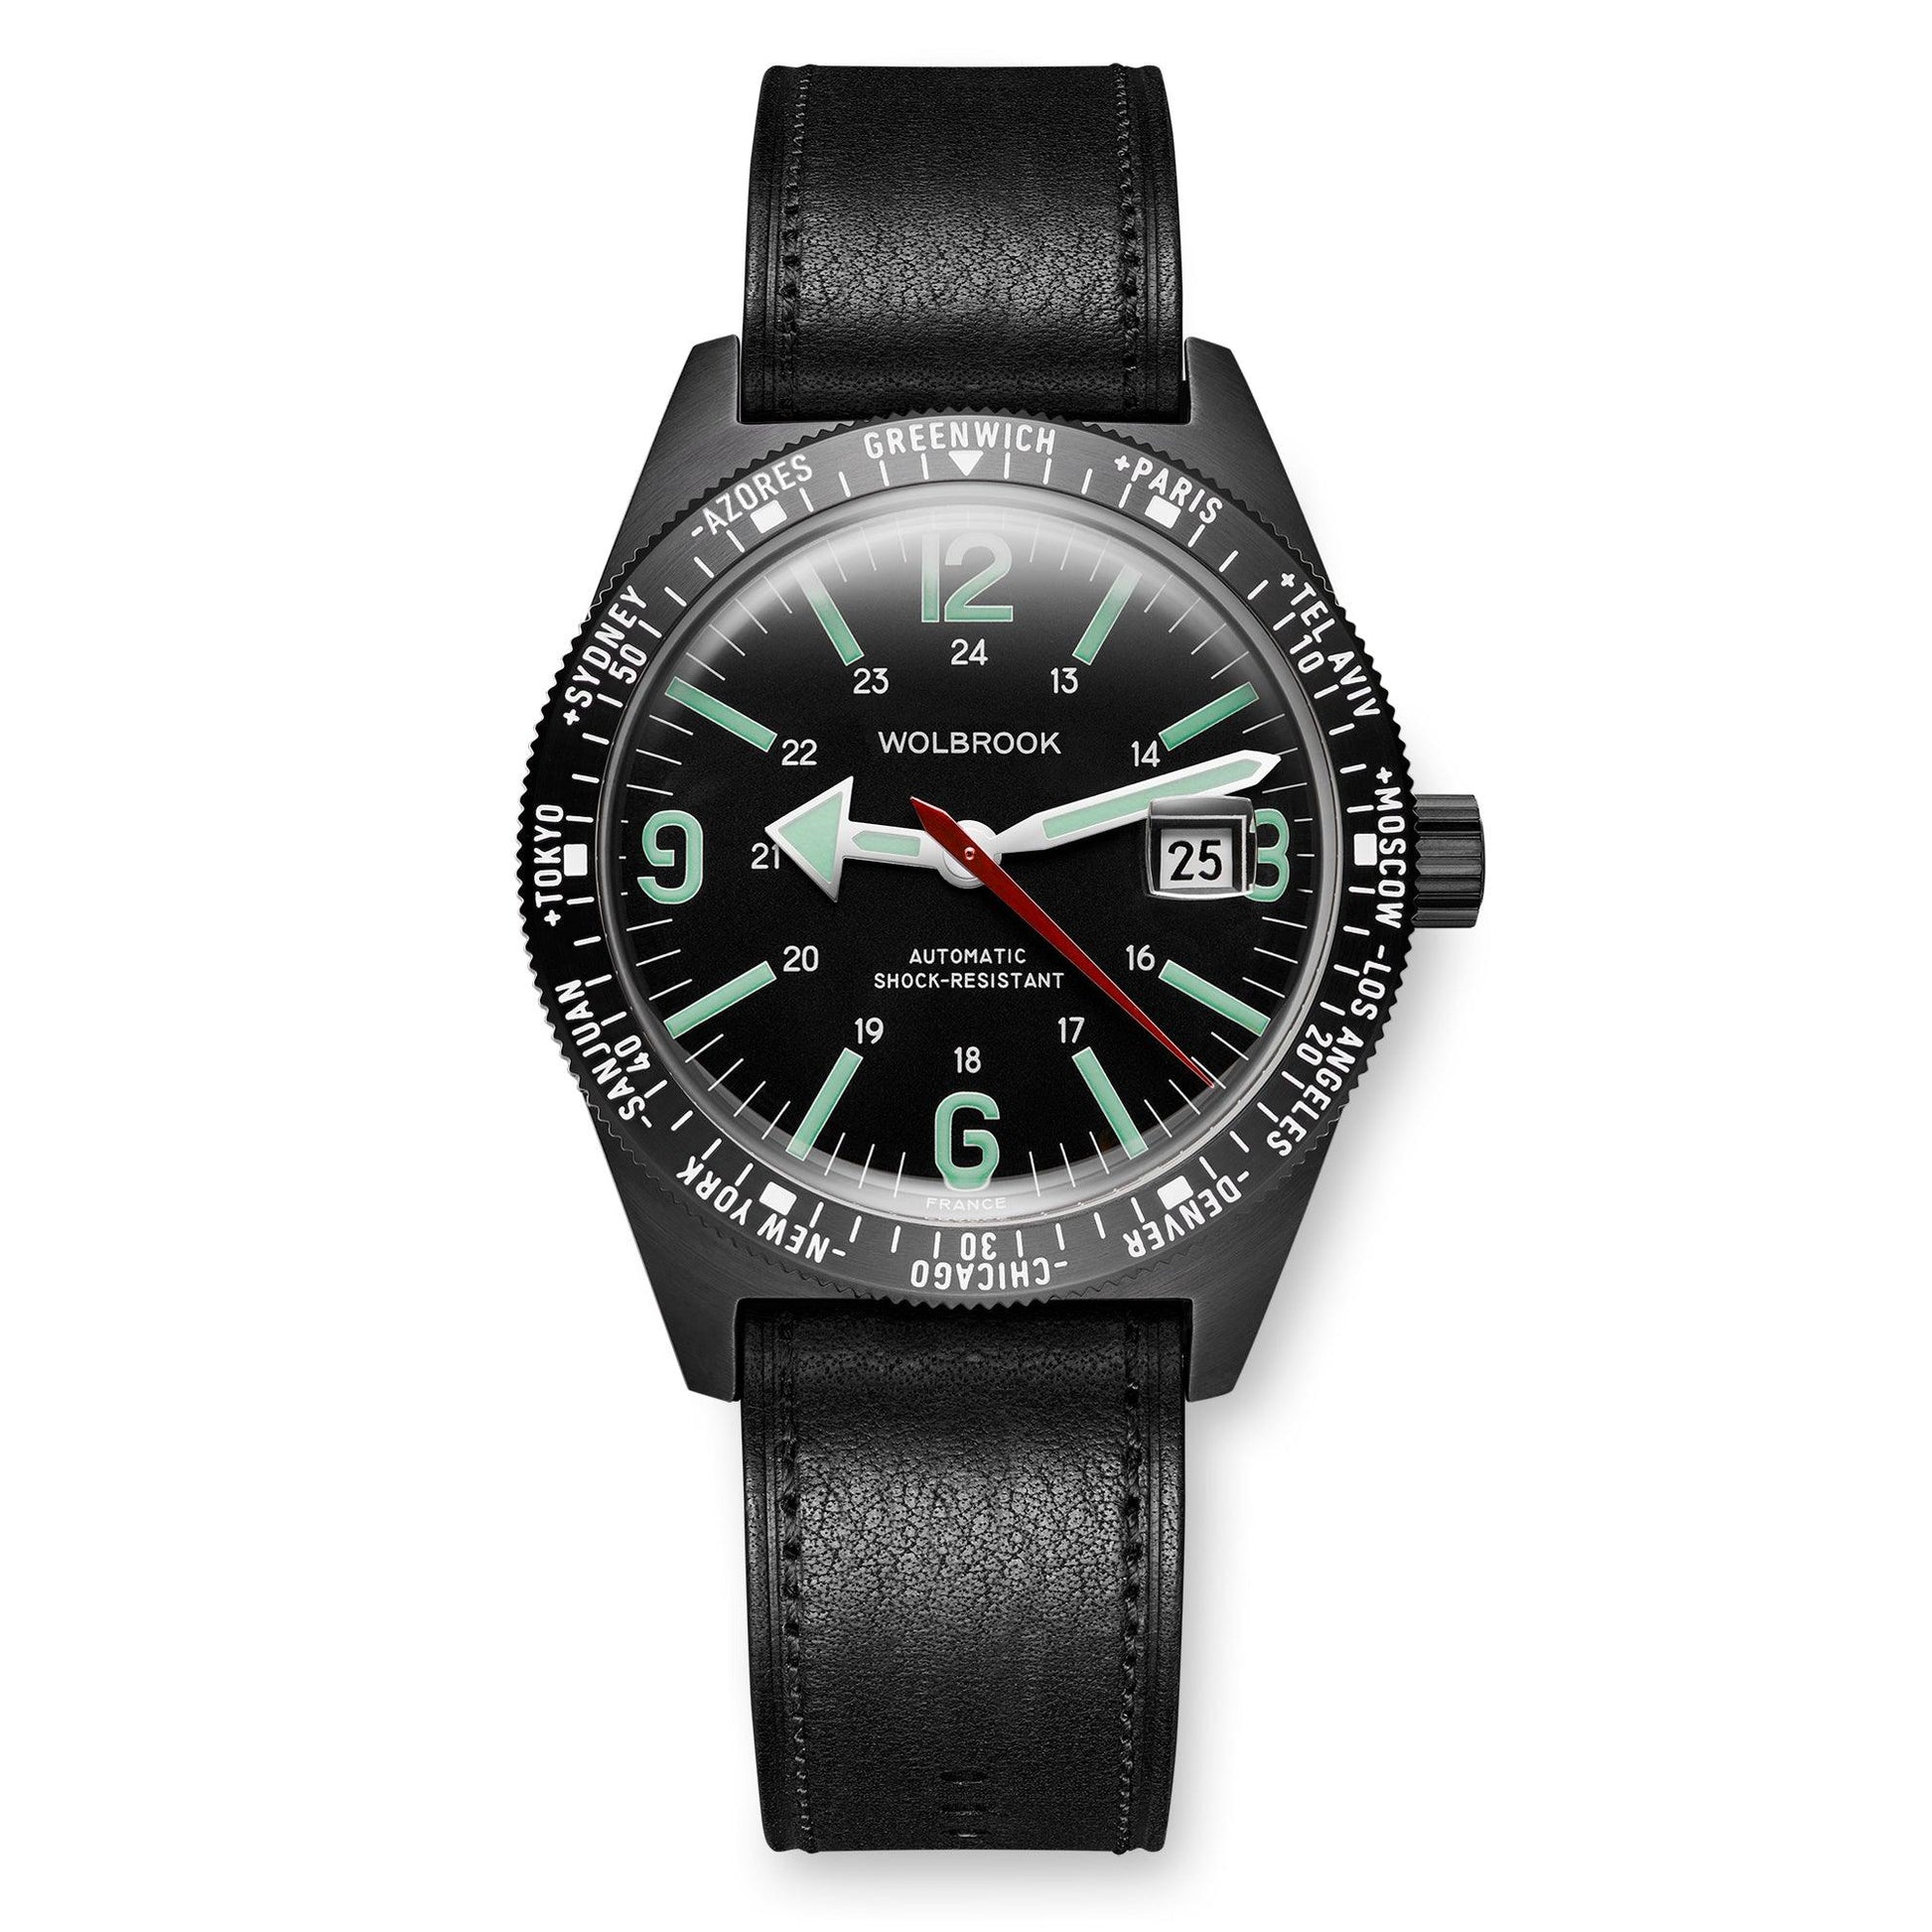 Skindiver WT Automatic Watch, Black Dial with Green C7 Super-LumiNova and Black PVD Case